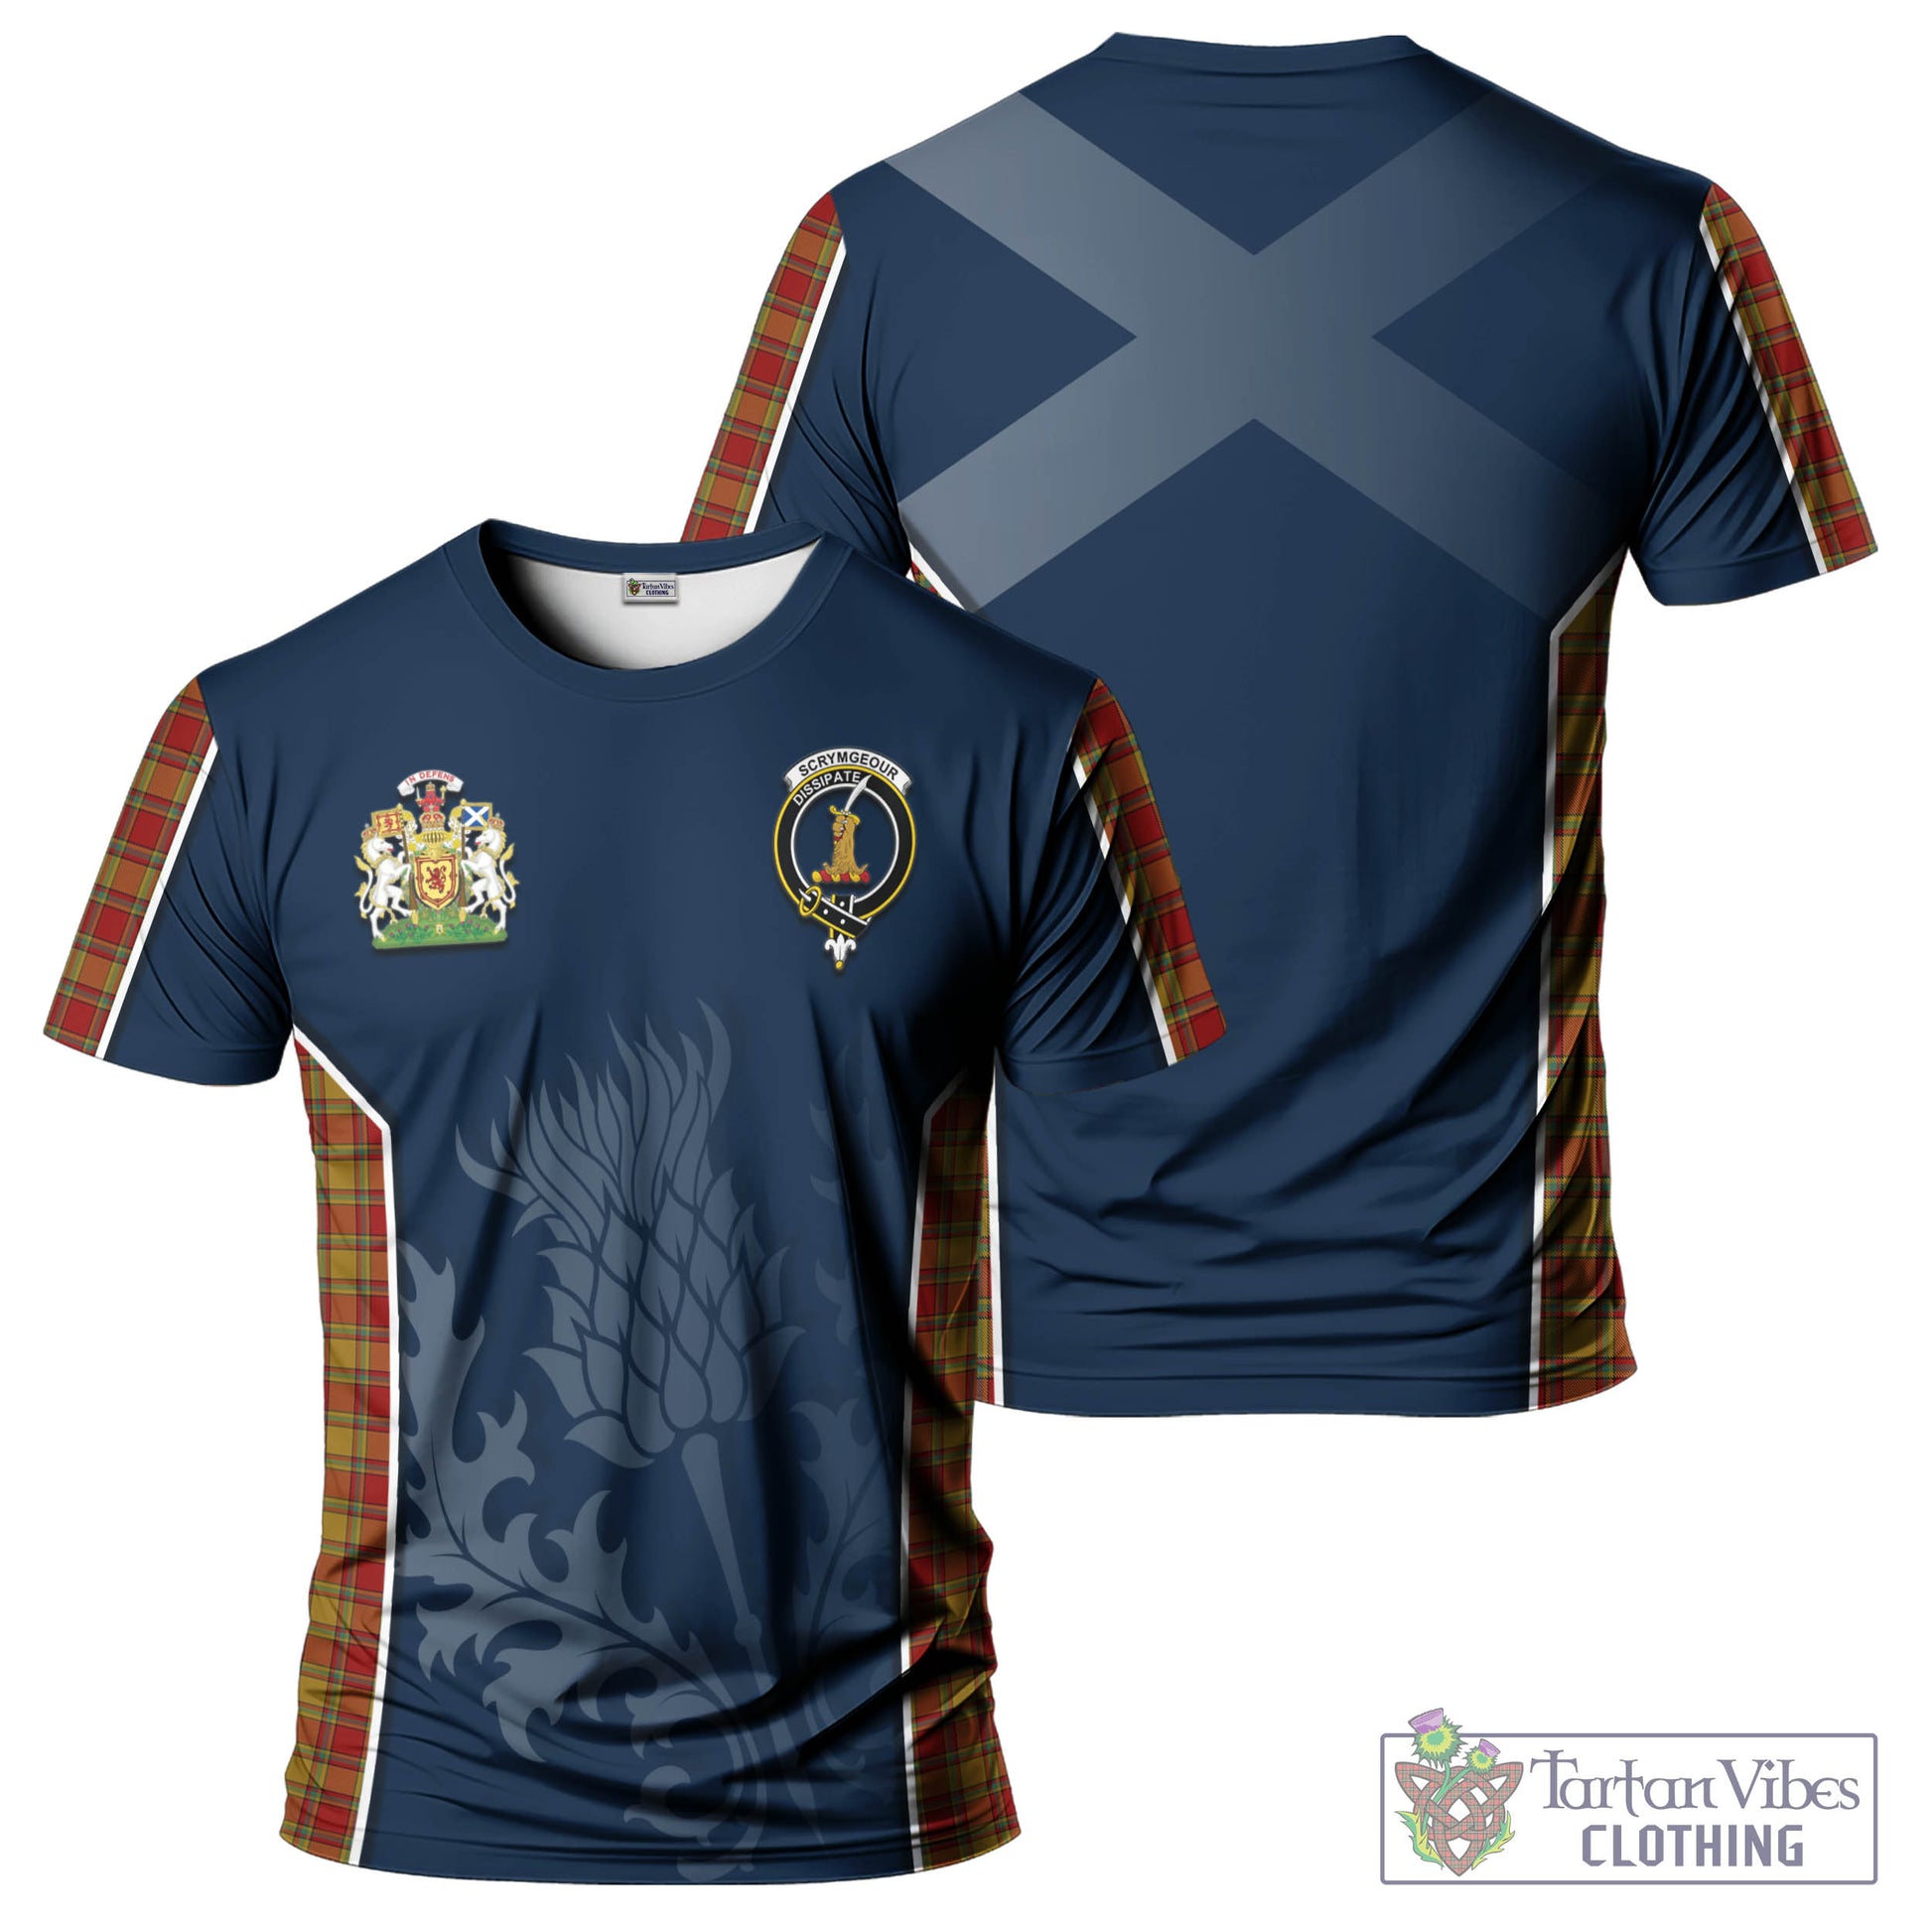 Tartan Vibes Clothing Scrymgeour Tartan T-Shirt with Family Crest and Scottish Thistle Vibes Sport Style